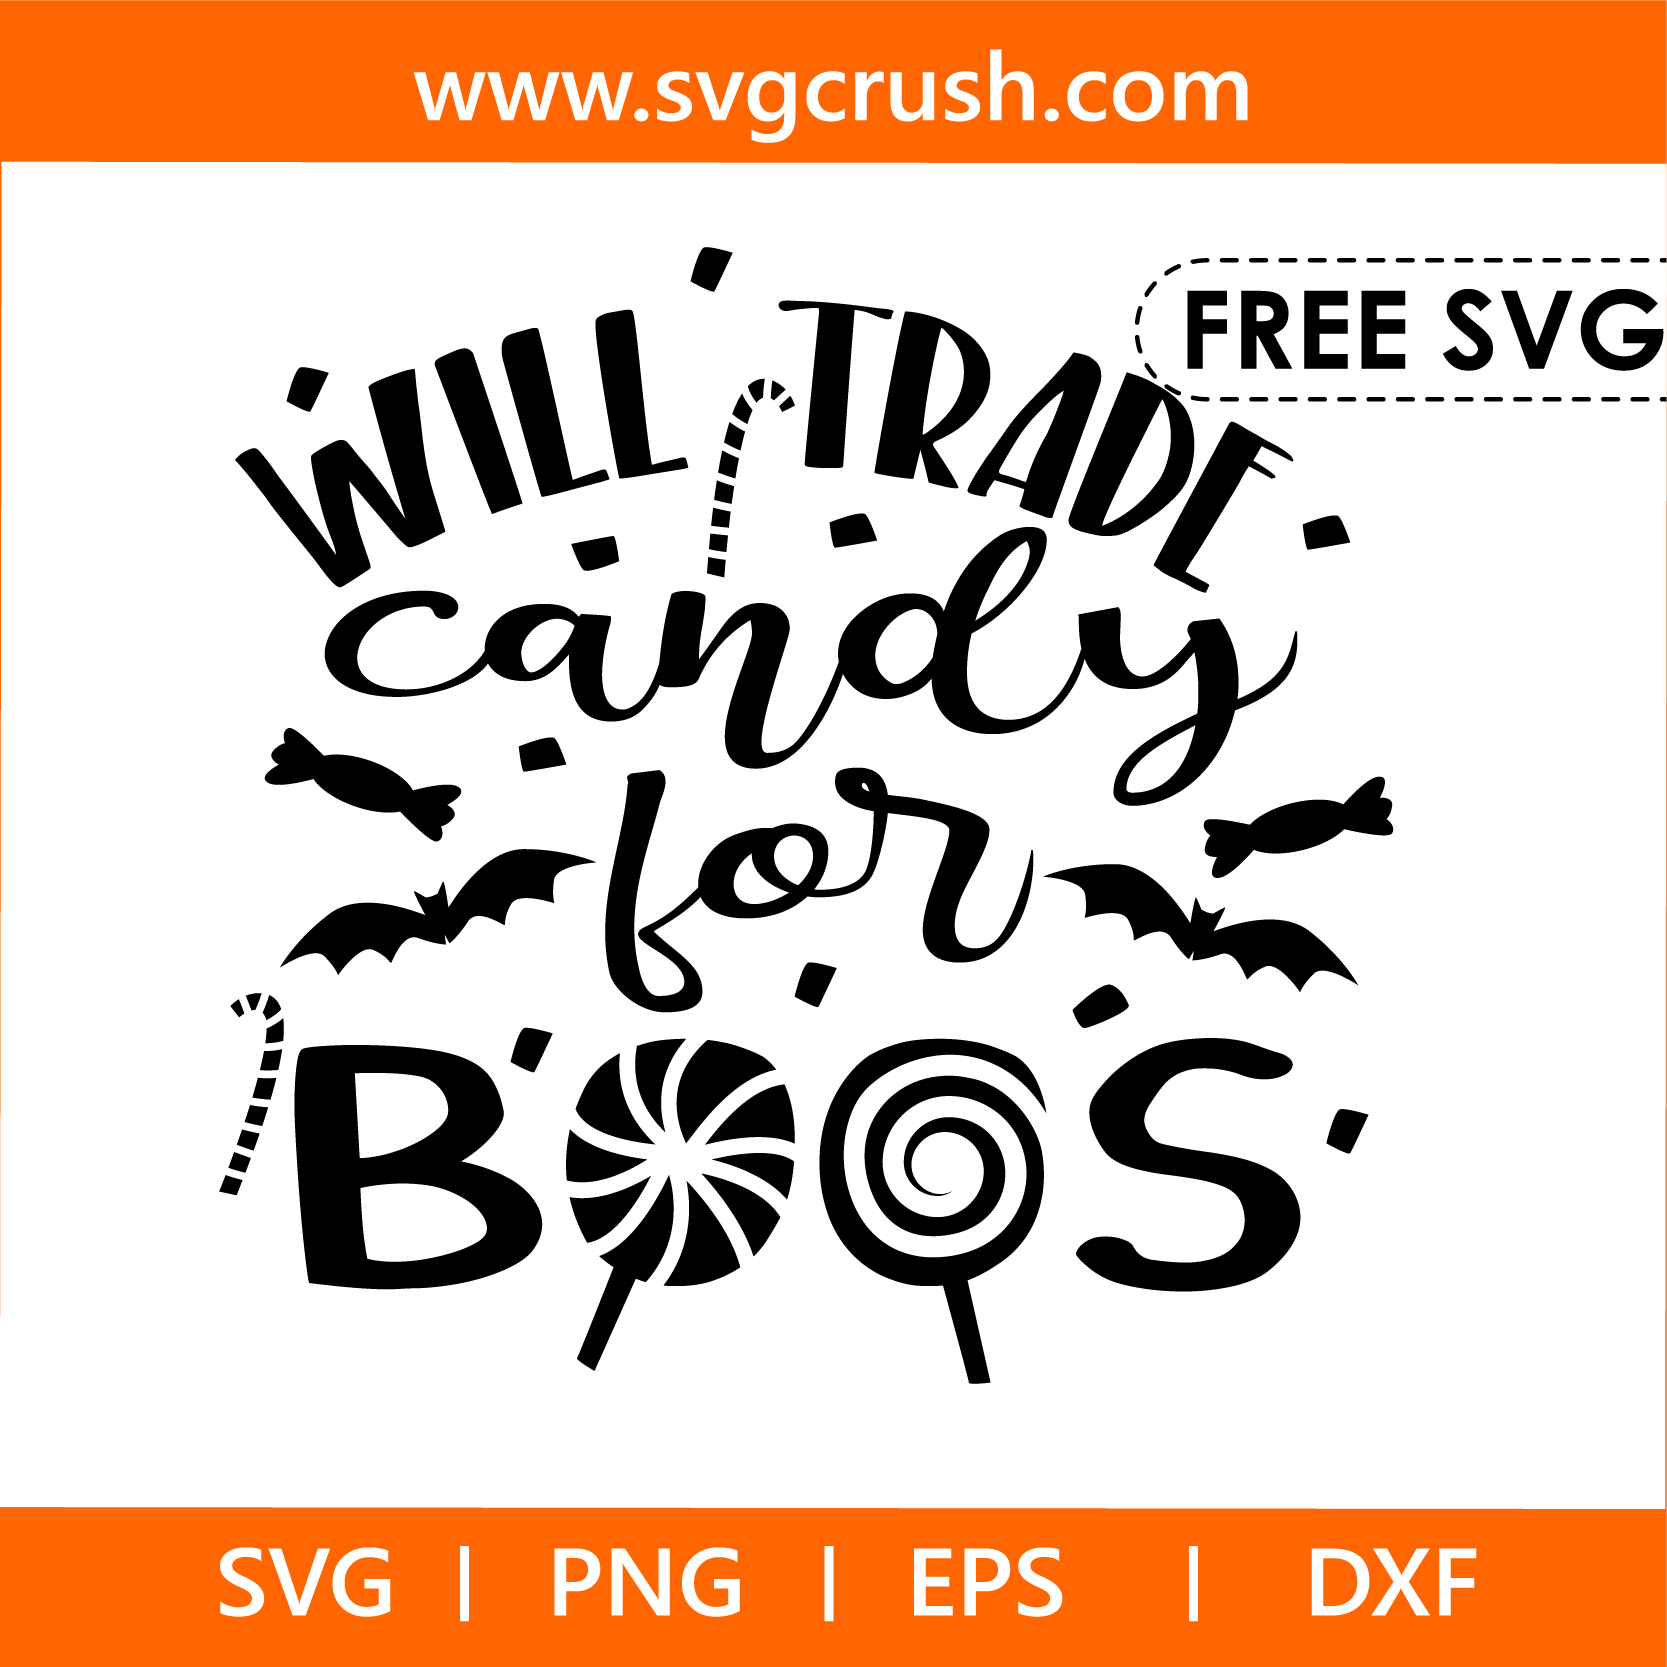 free will-trade-candy-for-boos-004 svg